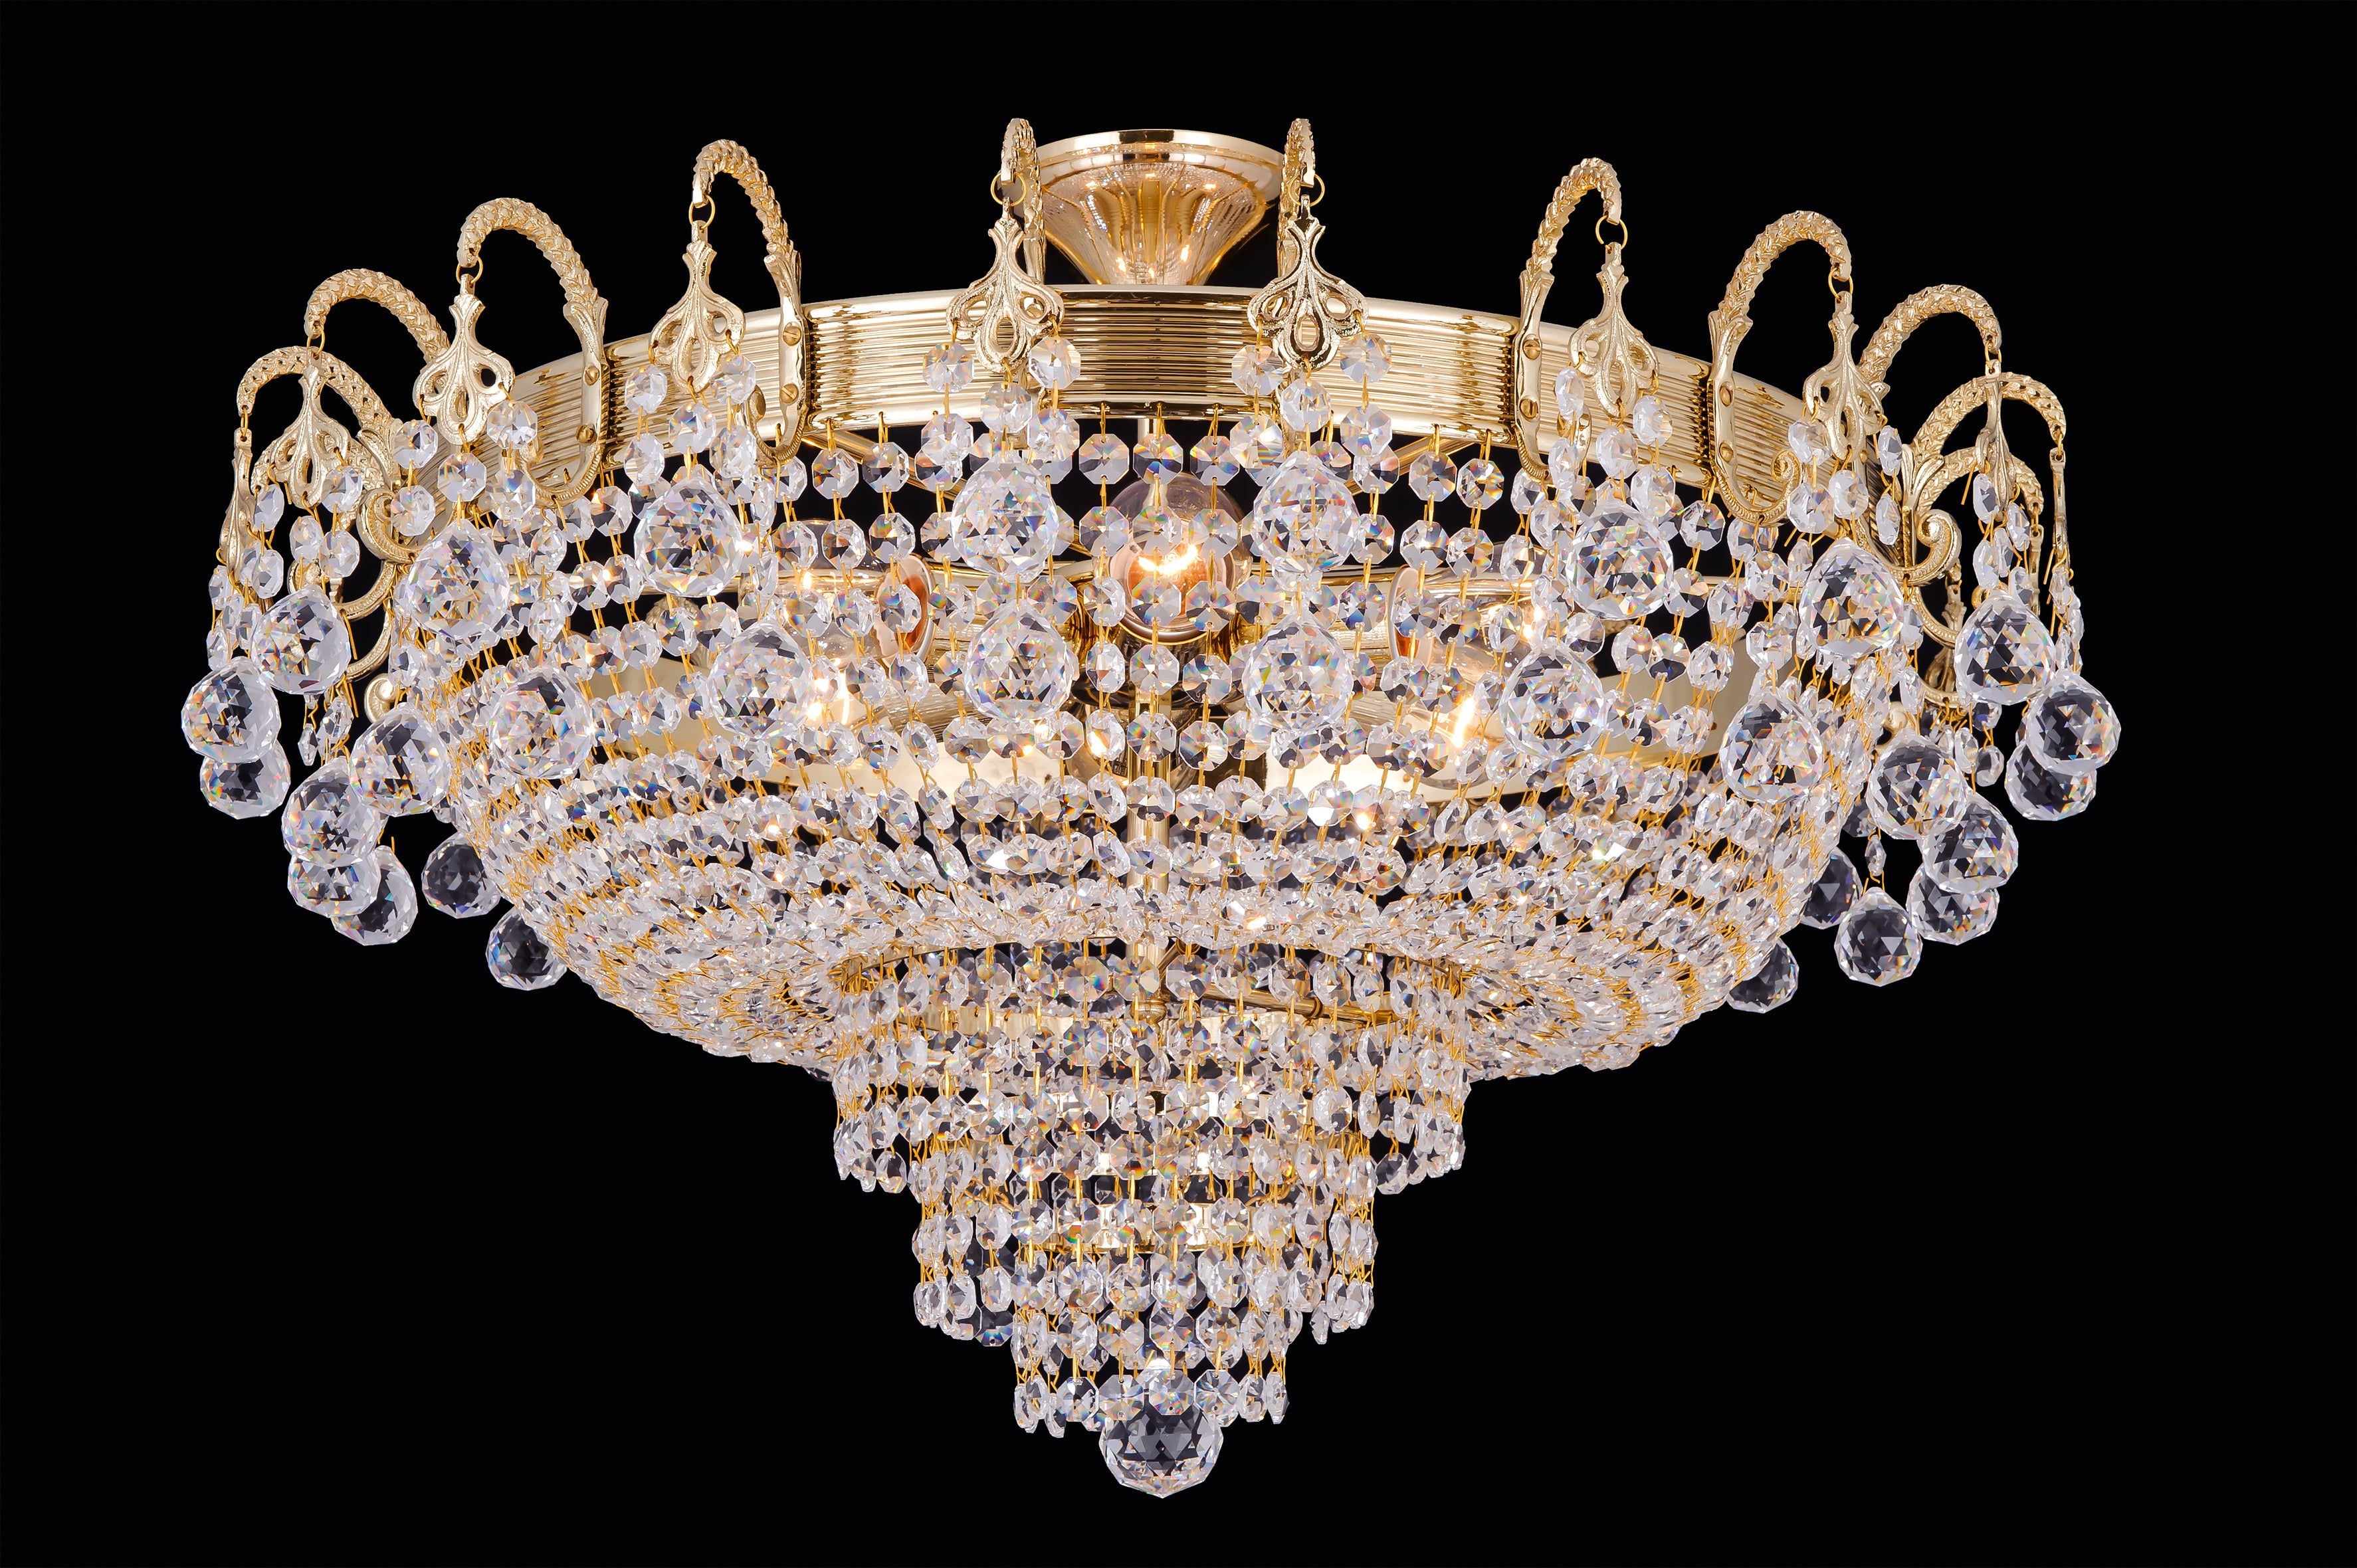 Denain Majestic 6-Light Asfour Crystal Chandelier in Gold Finish